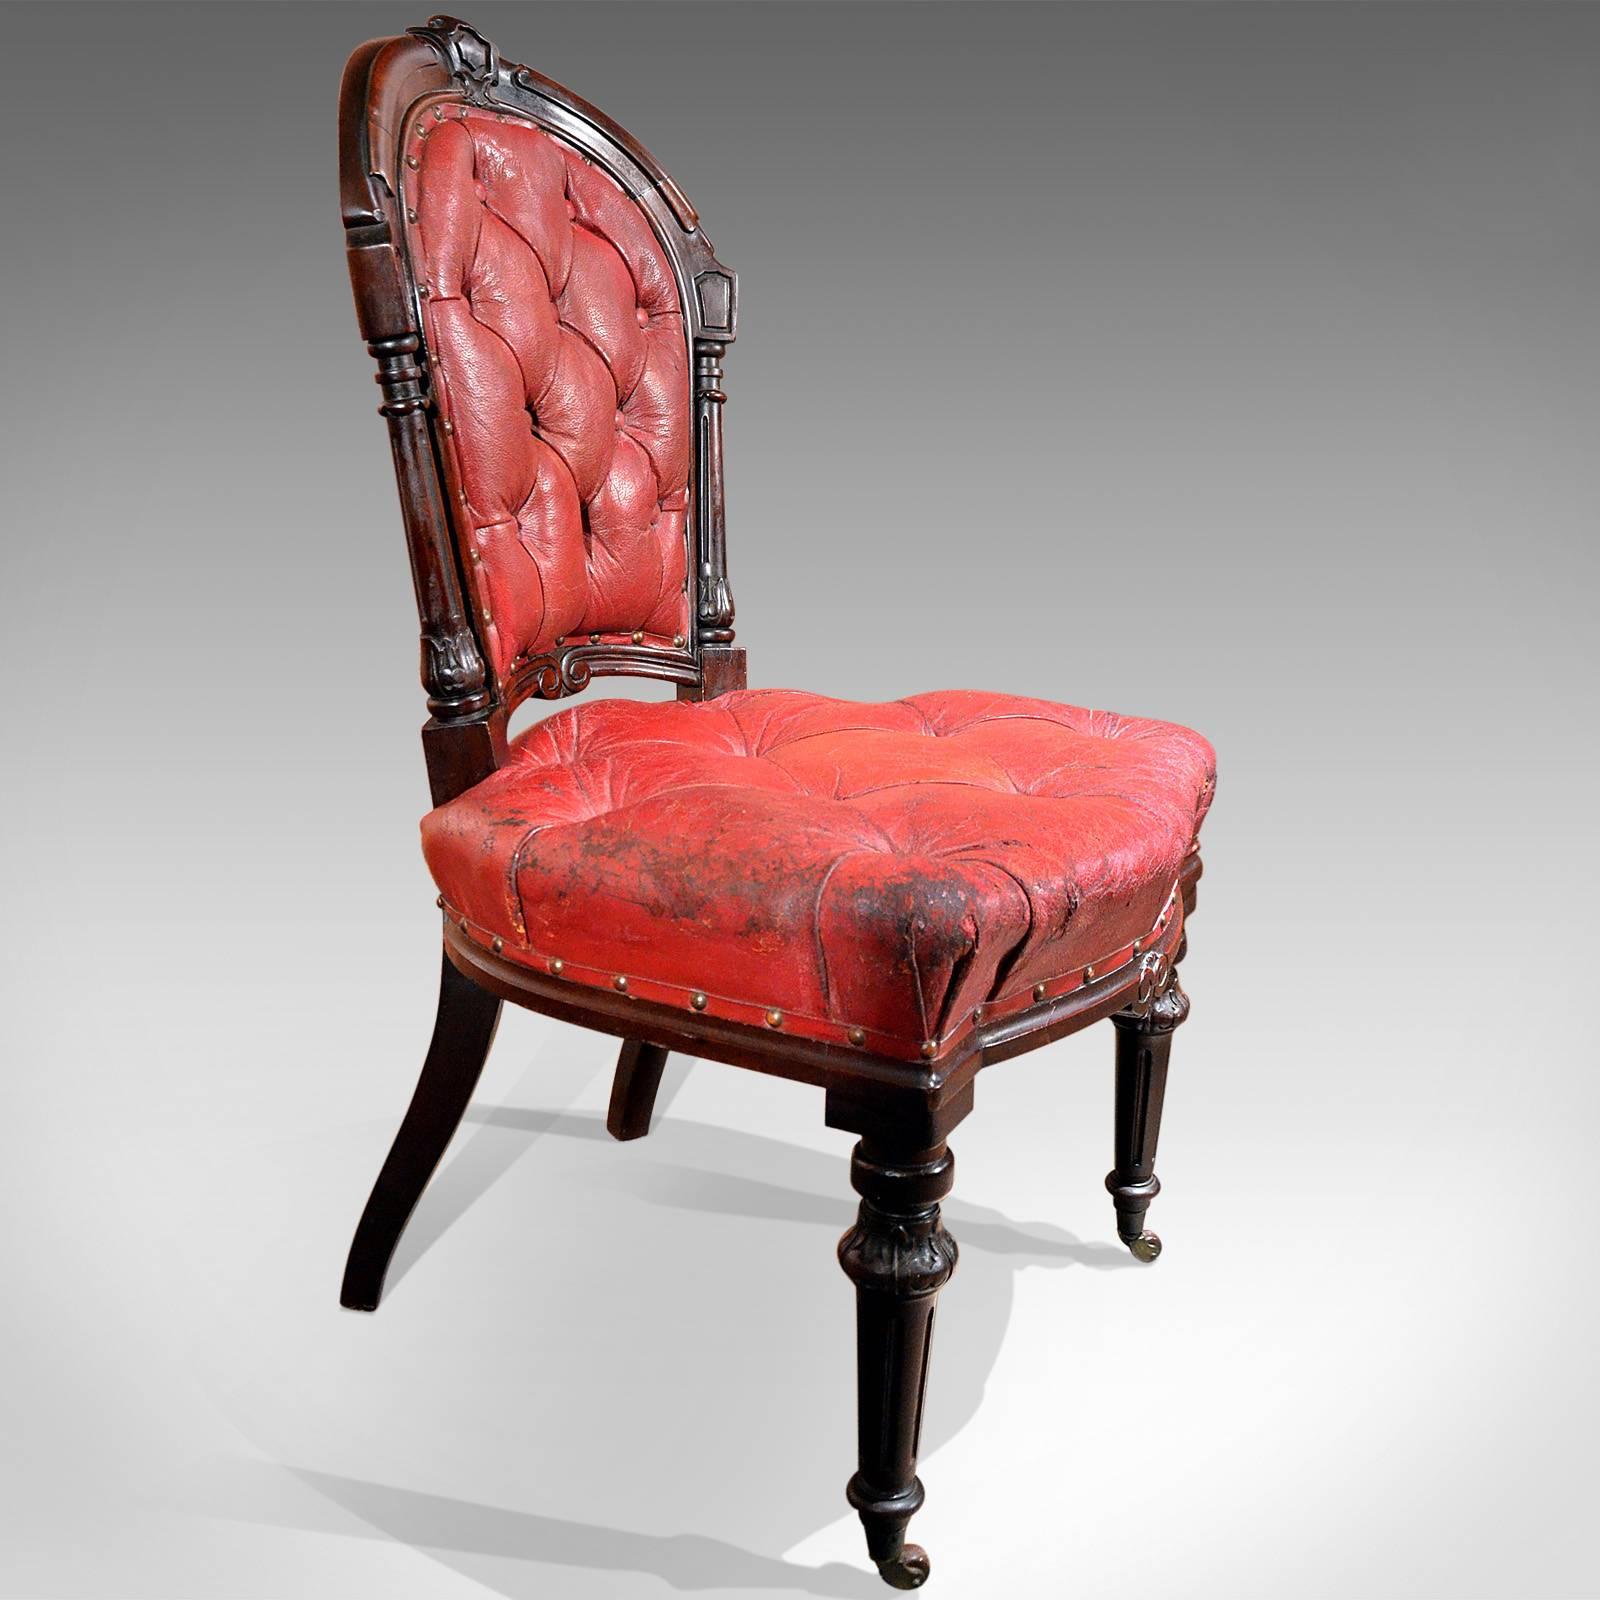 British Regency Red Leather Antique Library Chair, circa 1830